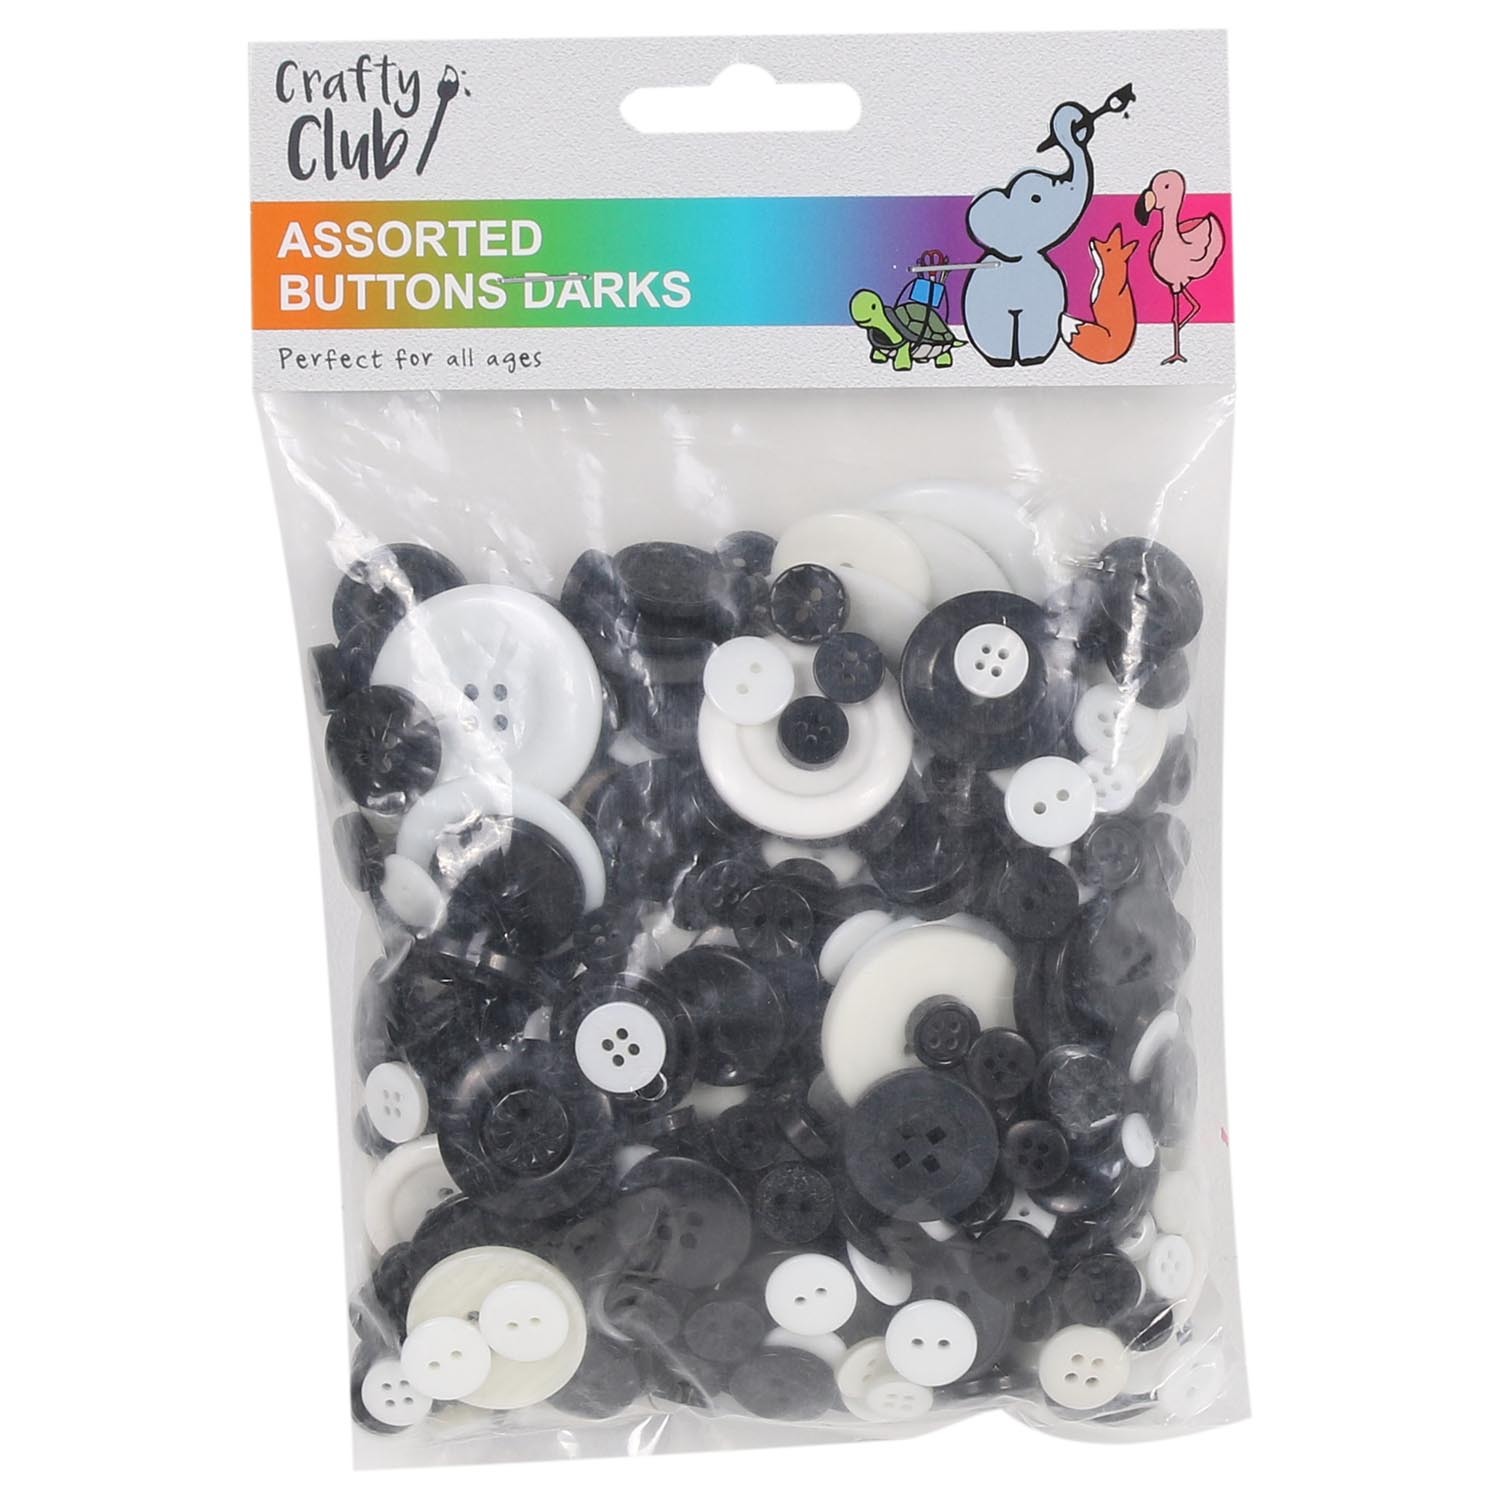 Crafty Club Assorted Buttons - Black/White Image